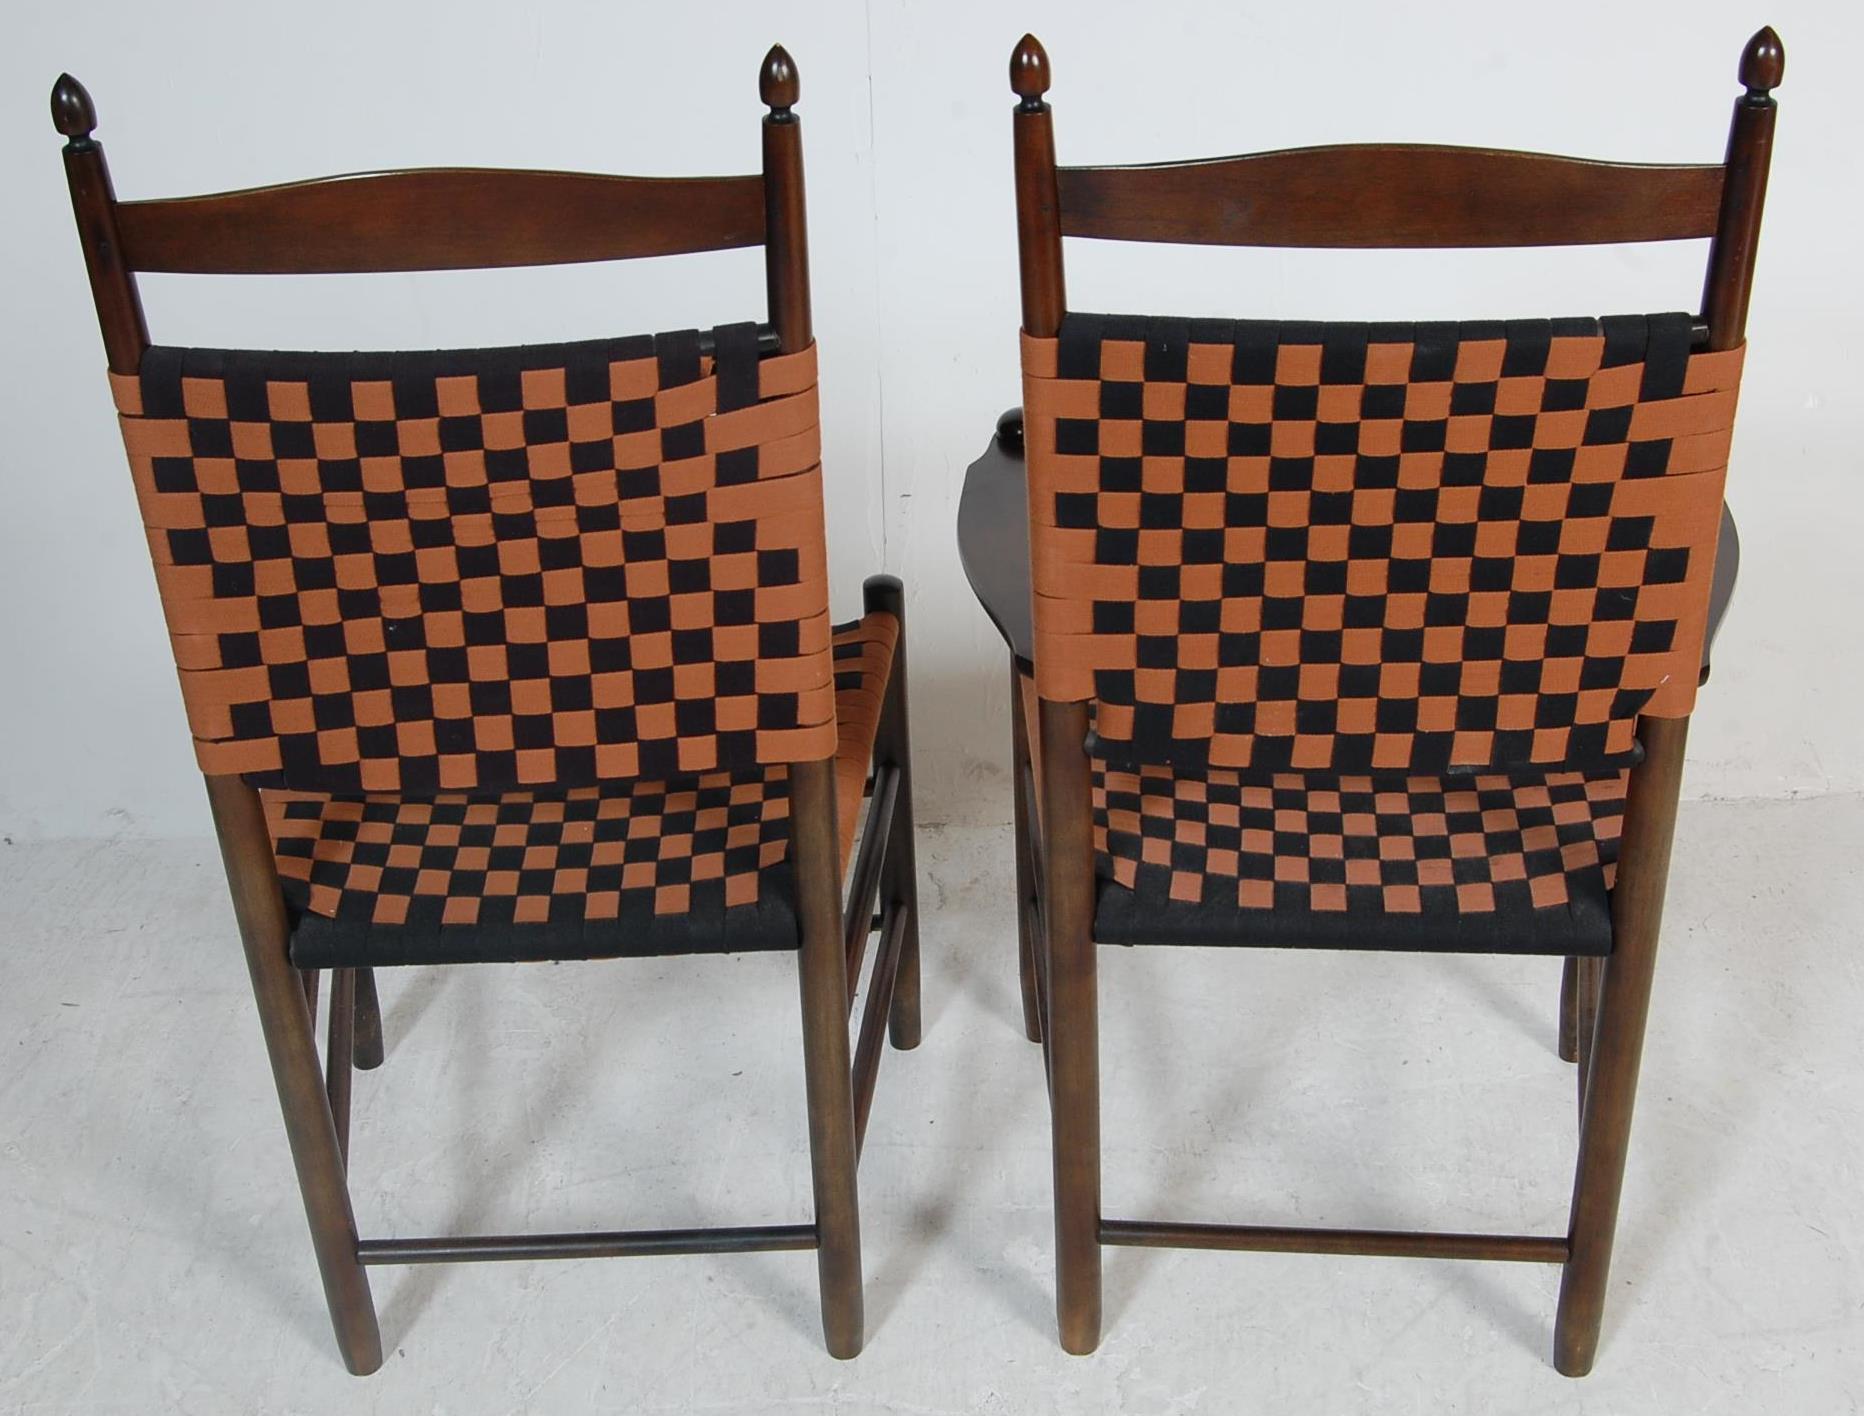 SET OF 10TH VINTAGE STYLE DINING CHAIRS - Image 4 of 6